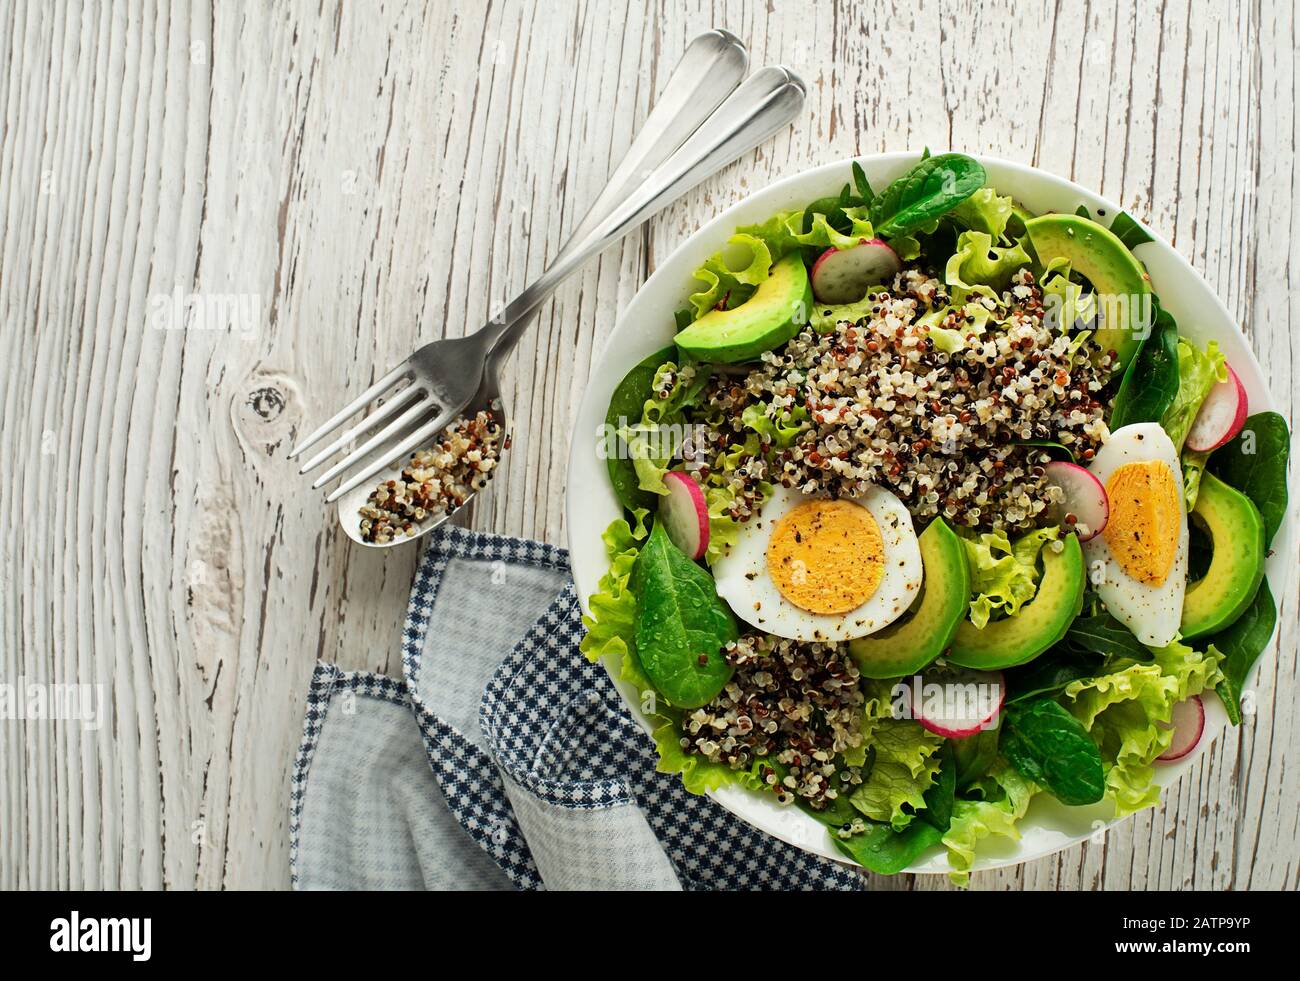 Healthy green salad meal with quinoa, egg and avocado on wooden background Stock Photo